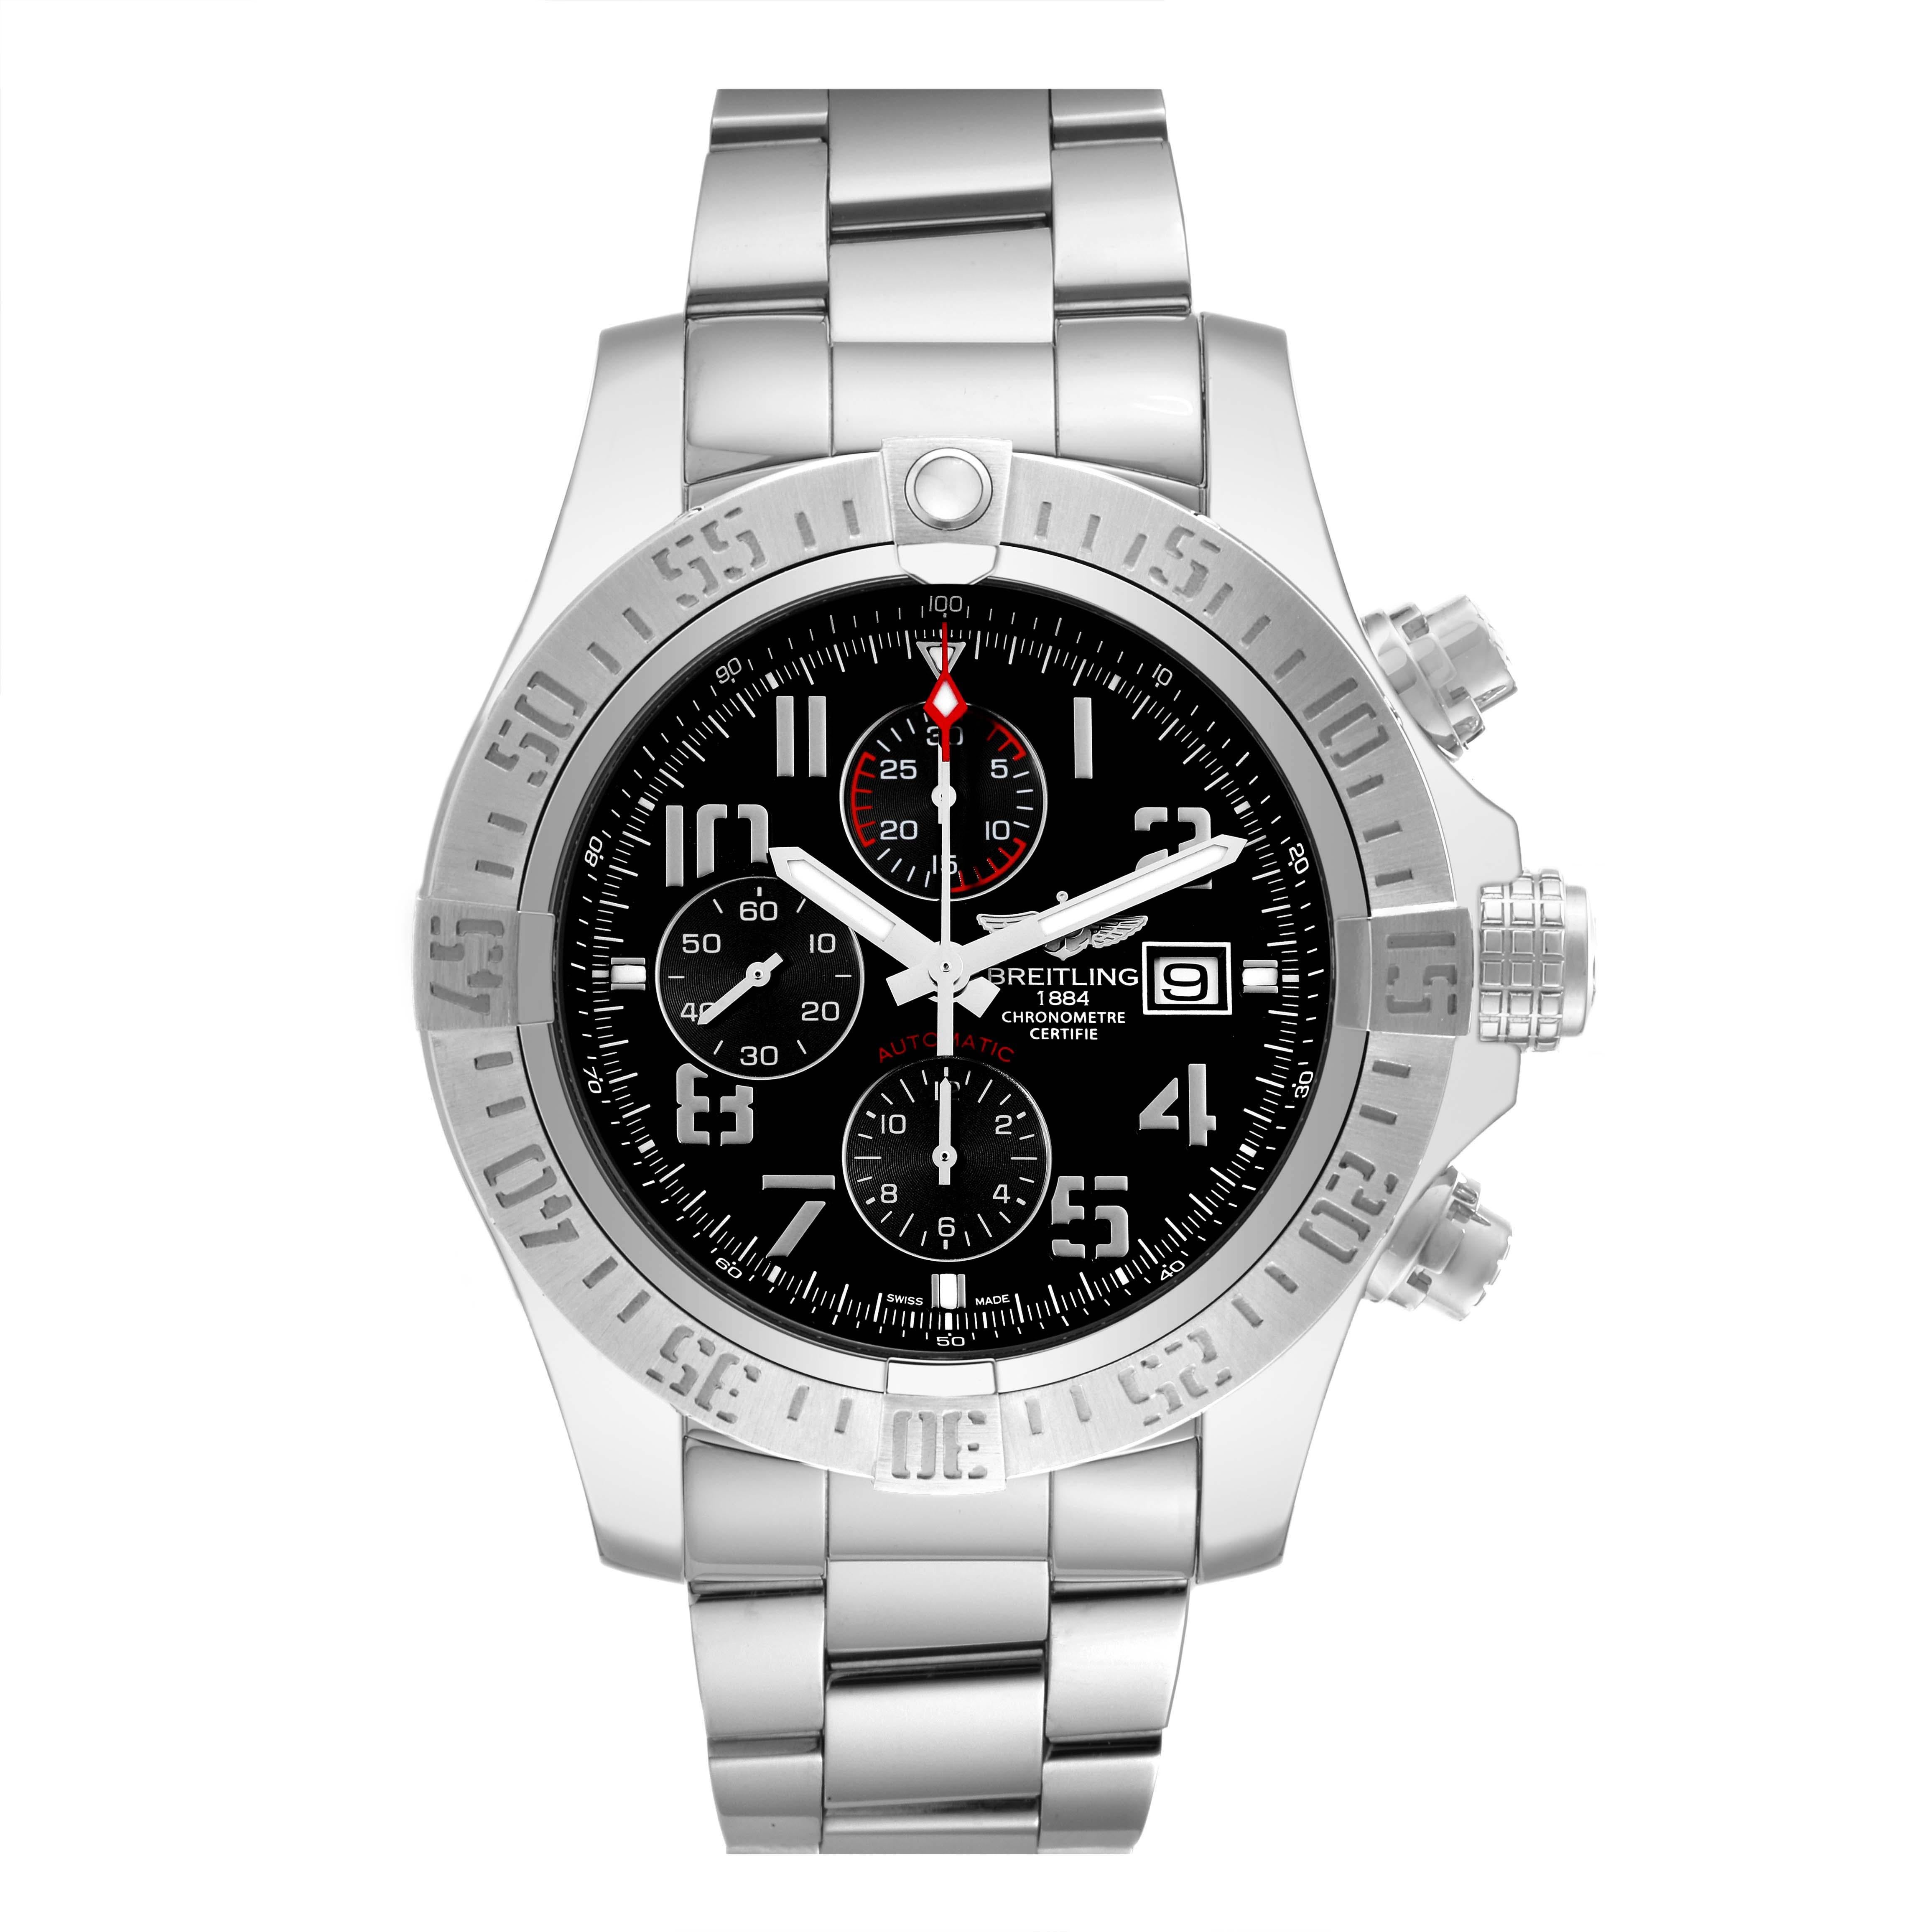 Breitling Aeromarine Super Avenger Steel Mens Watch A13371 Card. Automatic self-winding movement. Chronograph function. Stainless steel case 48 mm in diameter. Case thickness 17.75 mm. Stainless steel unidirectional rotating bezel. 0-60